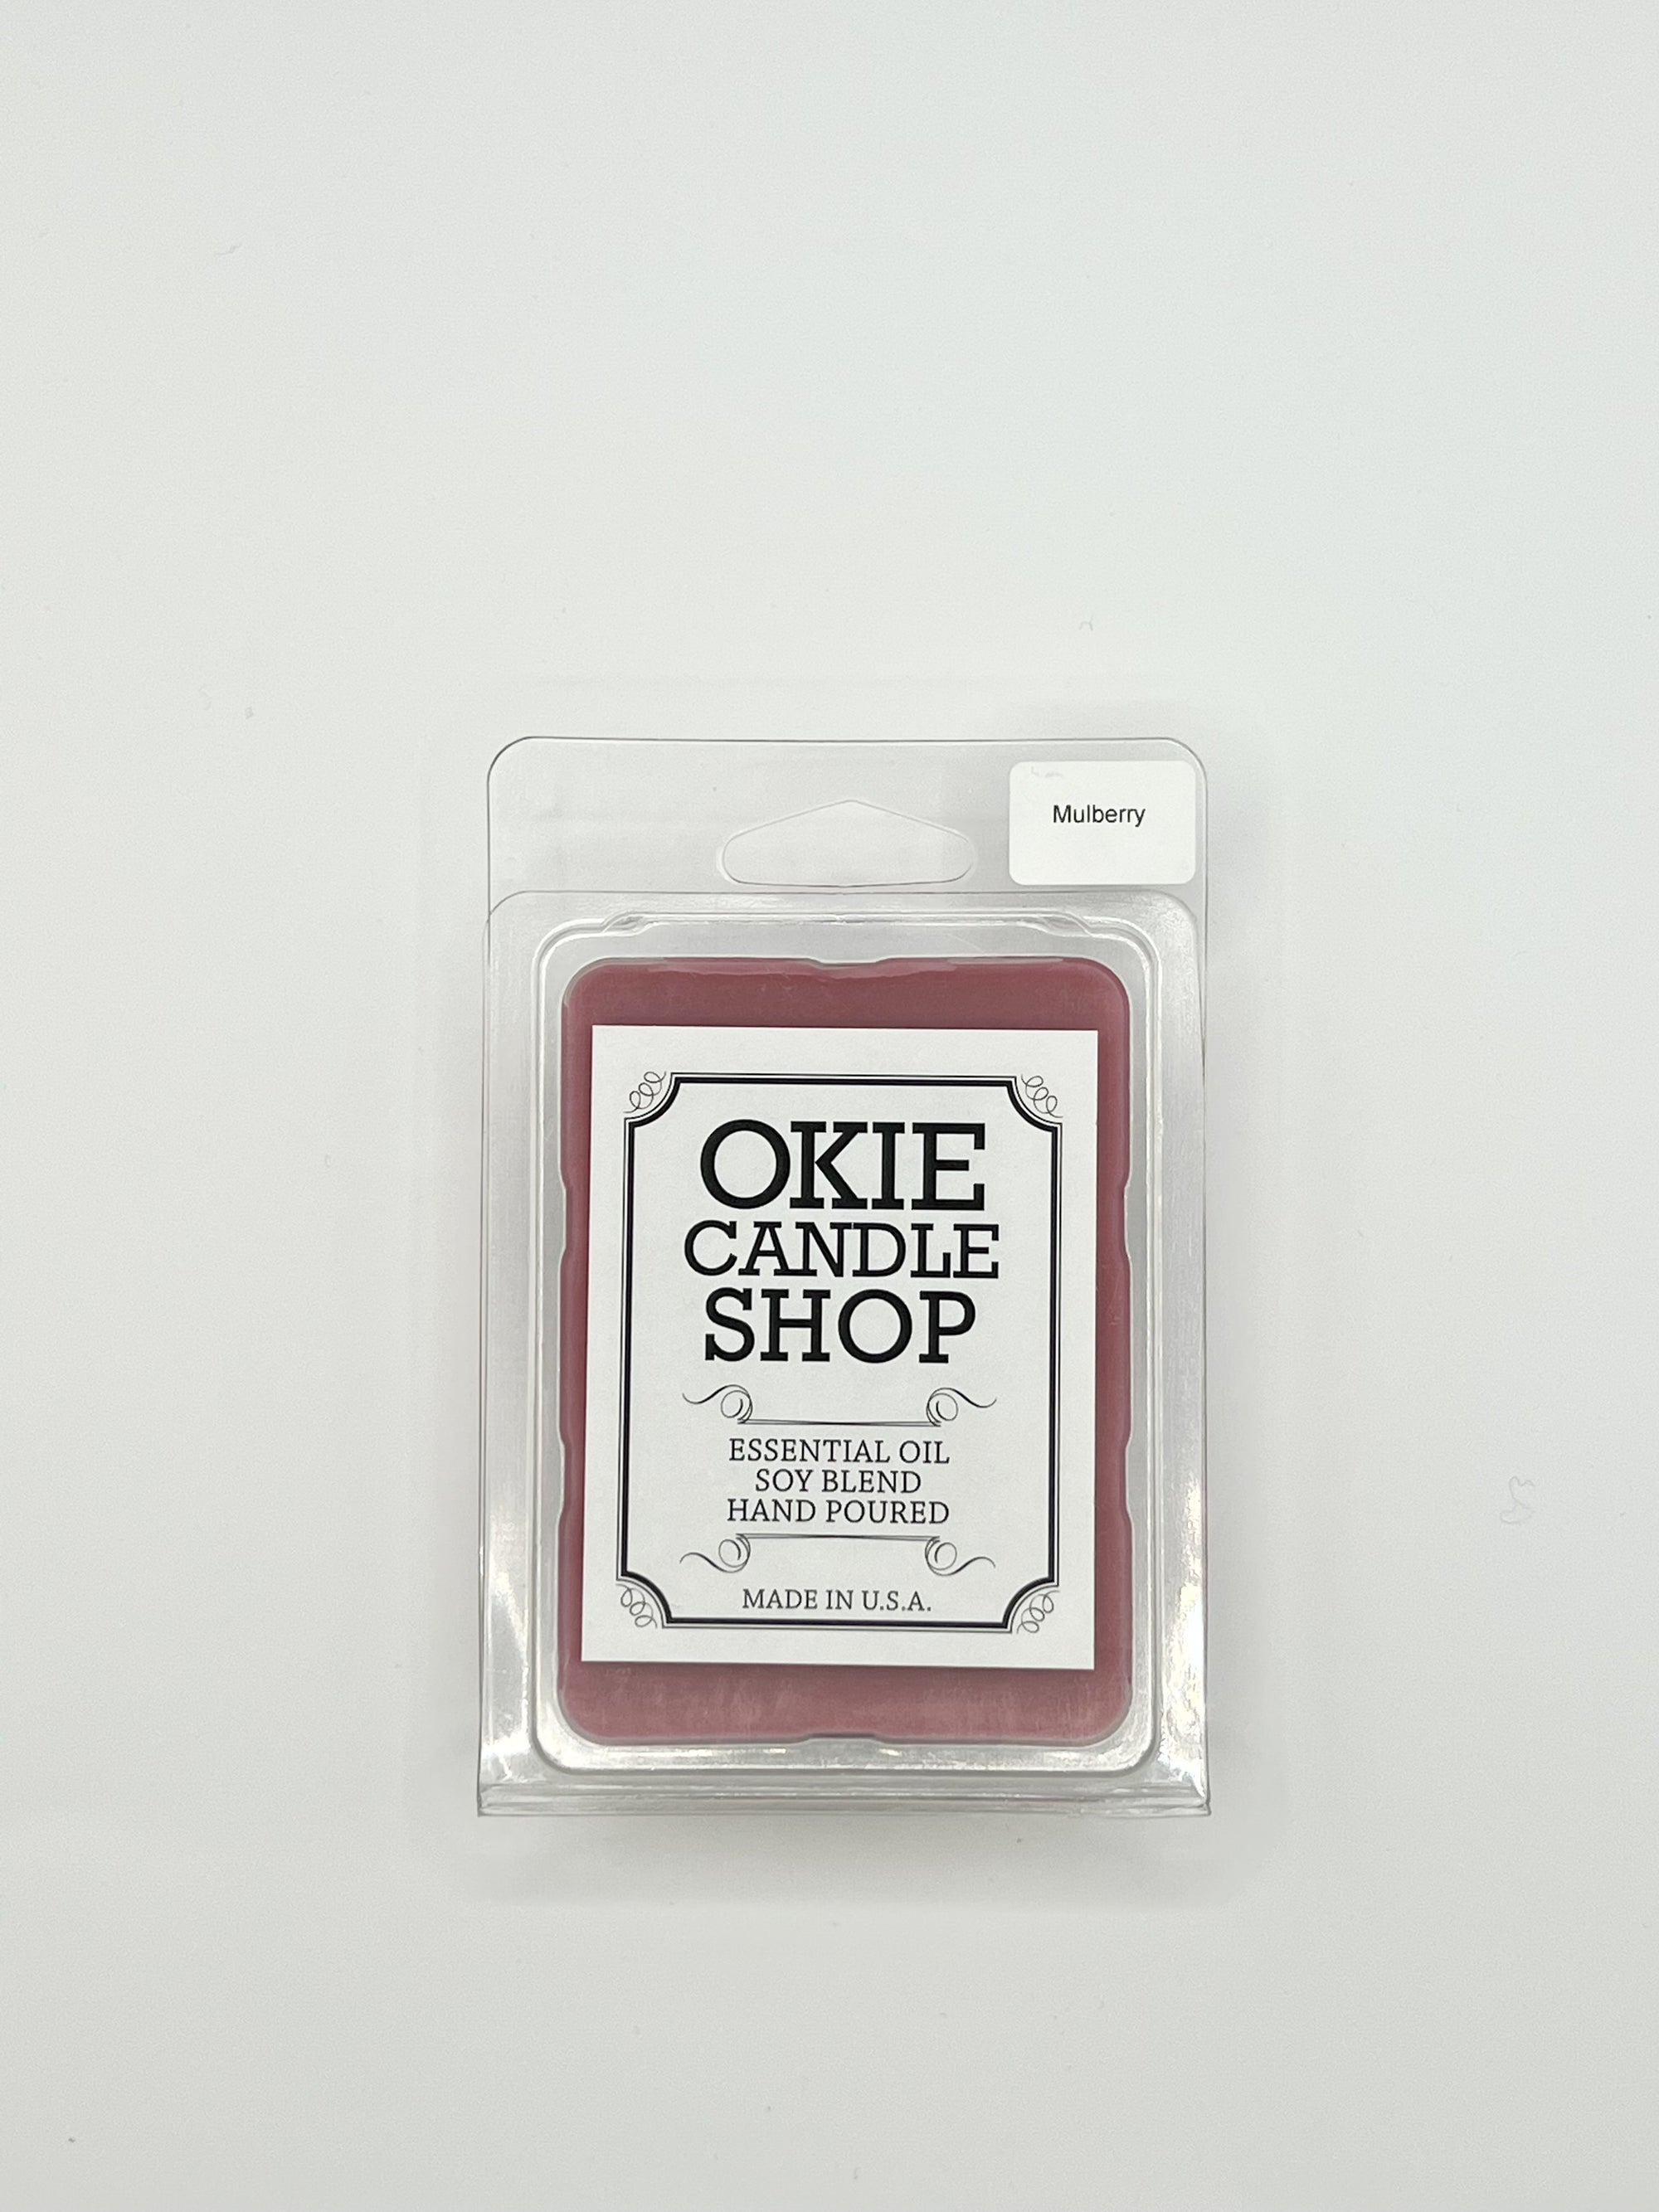 Okie Candle Mulberry - Wax Melts